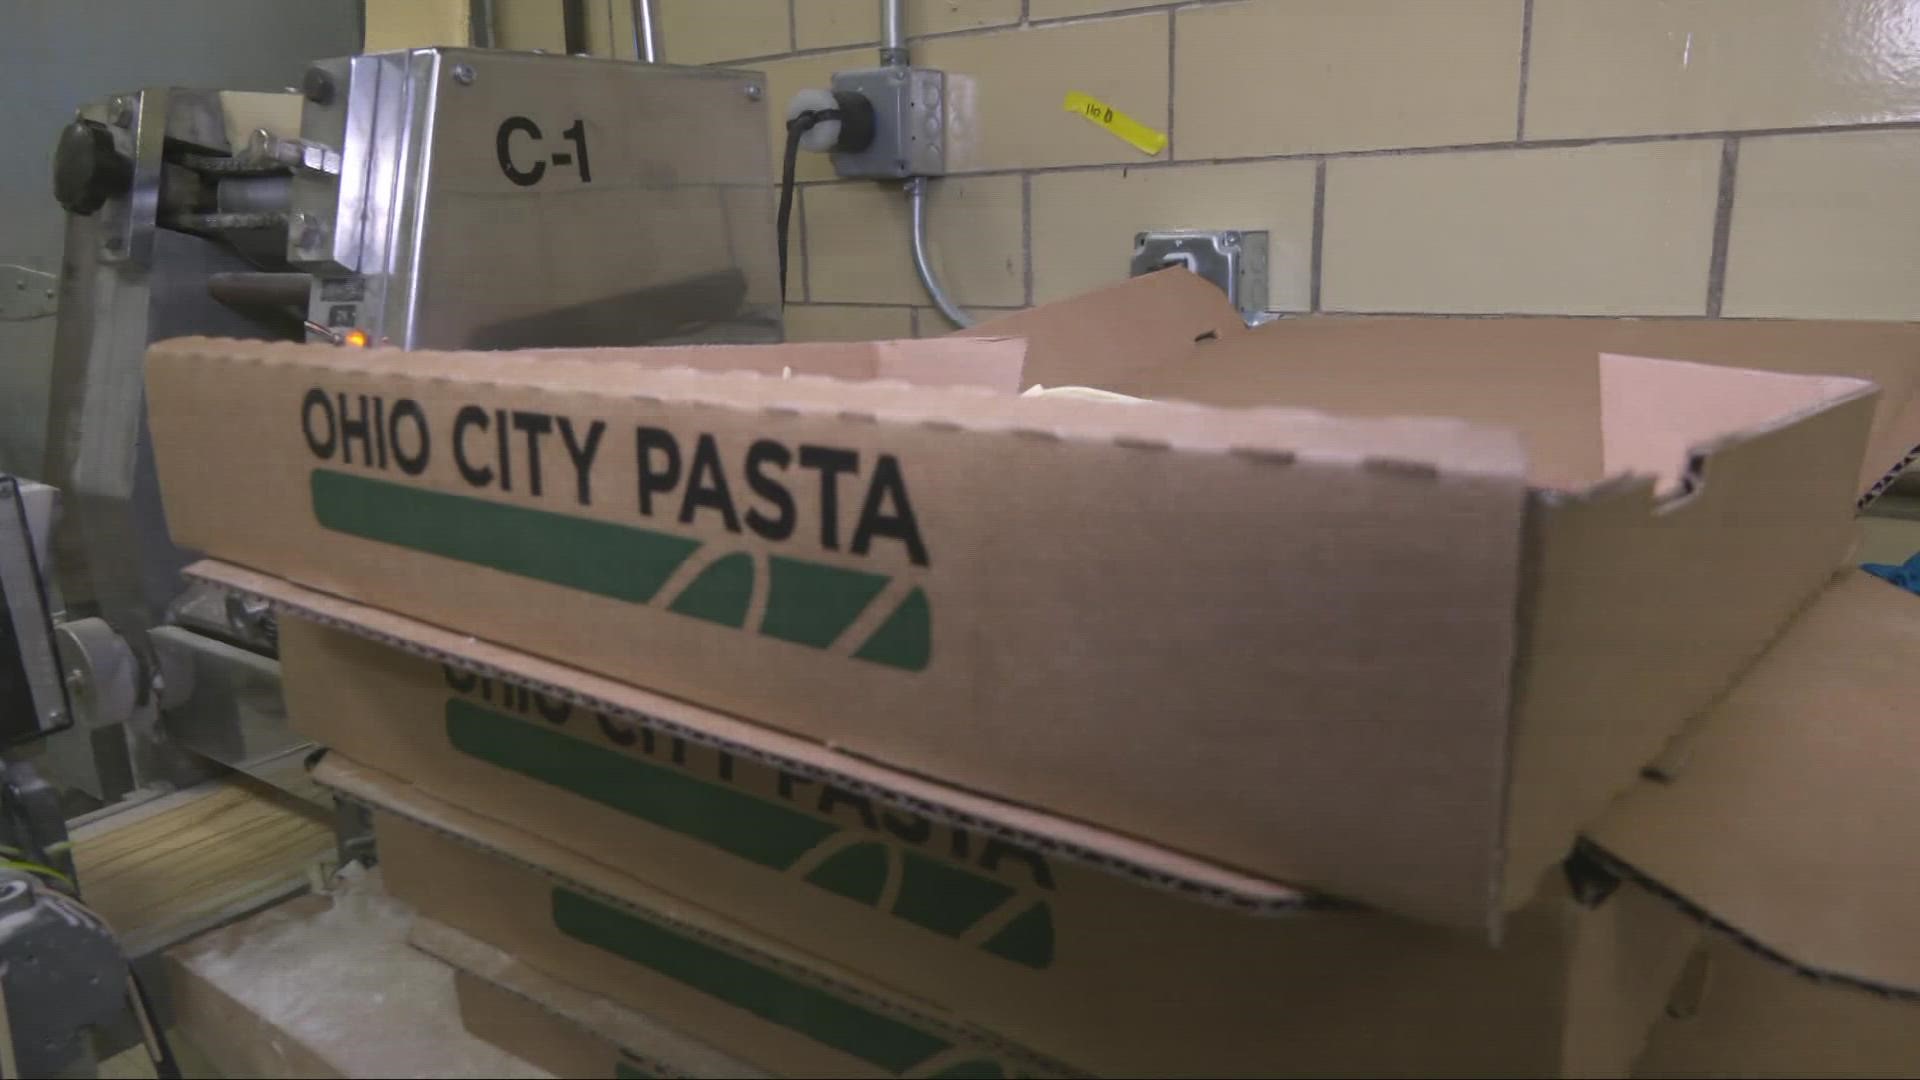 Learn how Ohio City Pasta makes their fresh pasta from scratch!